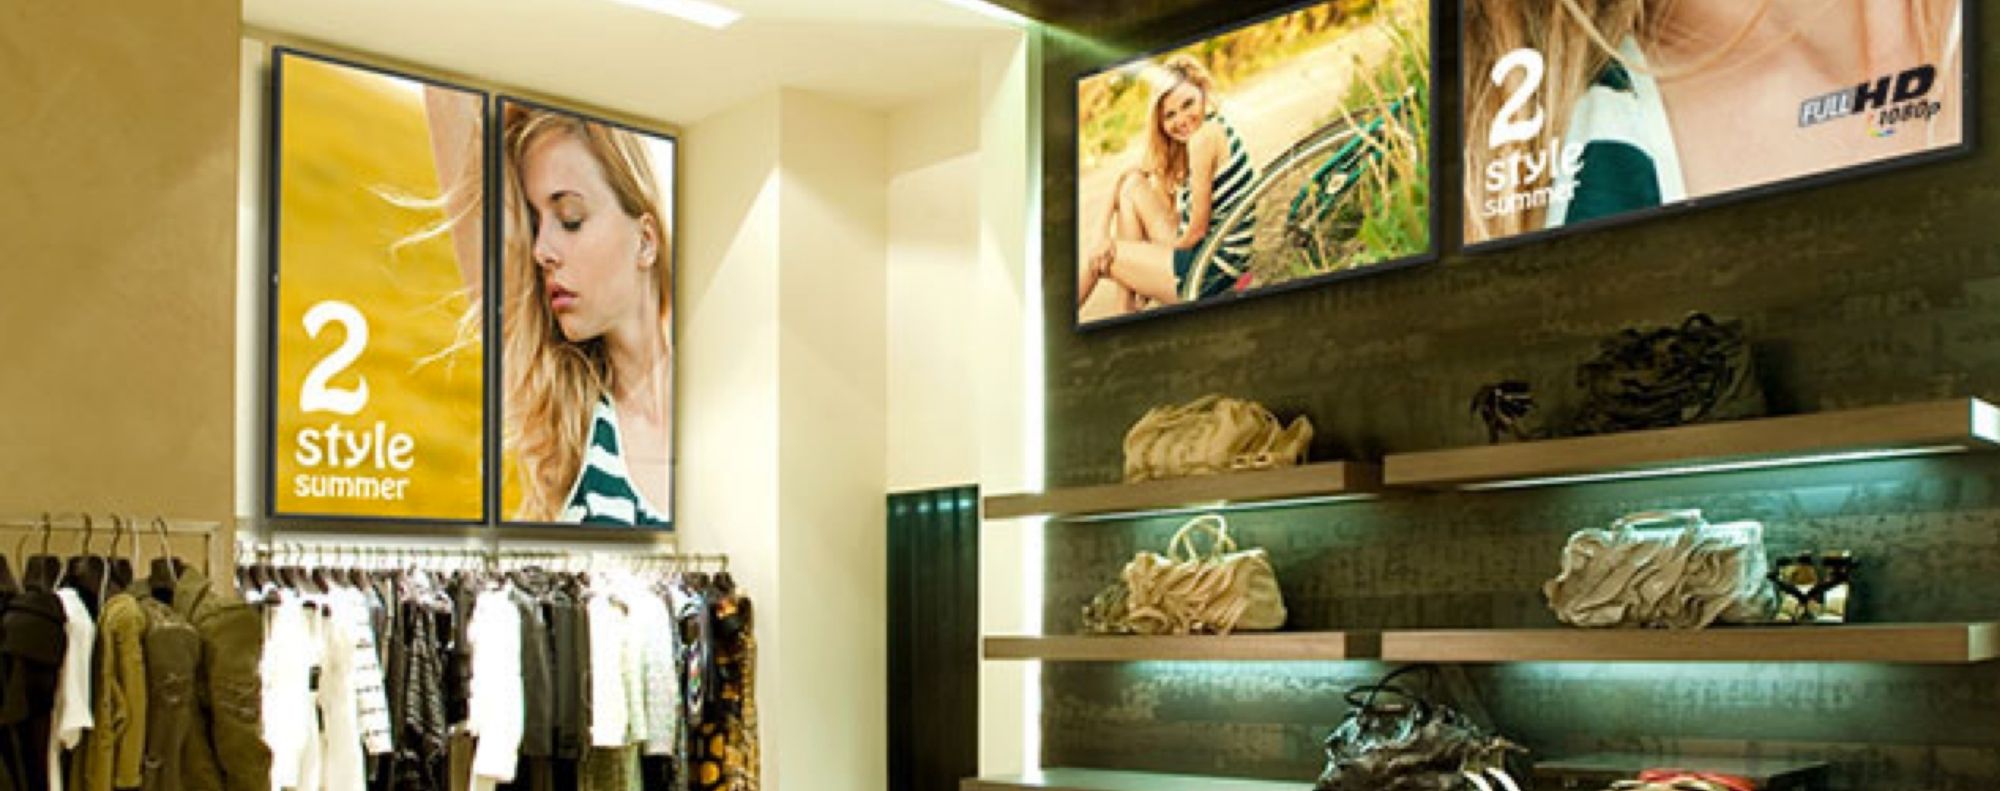 Retail Digital Signage in stores